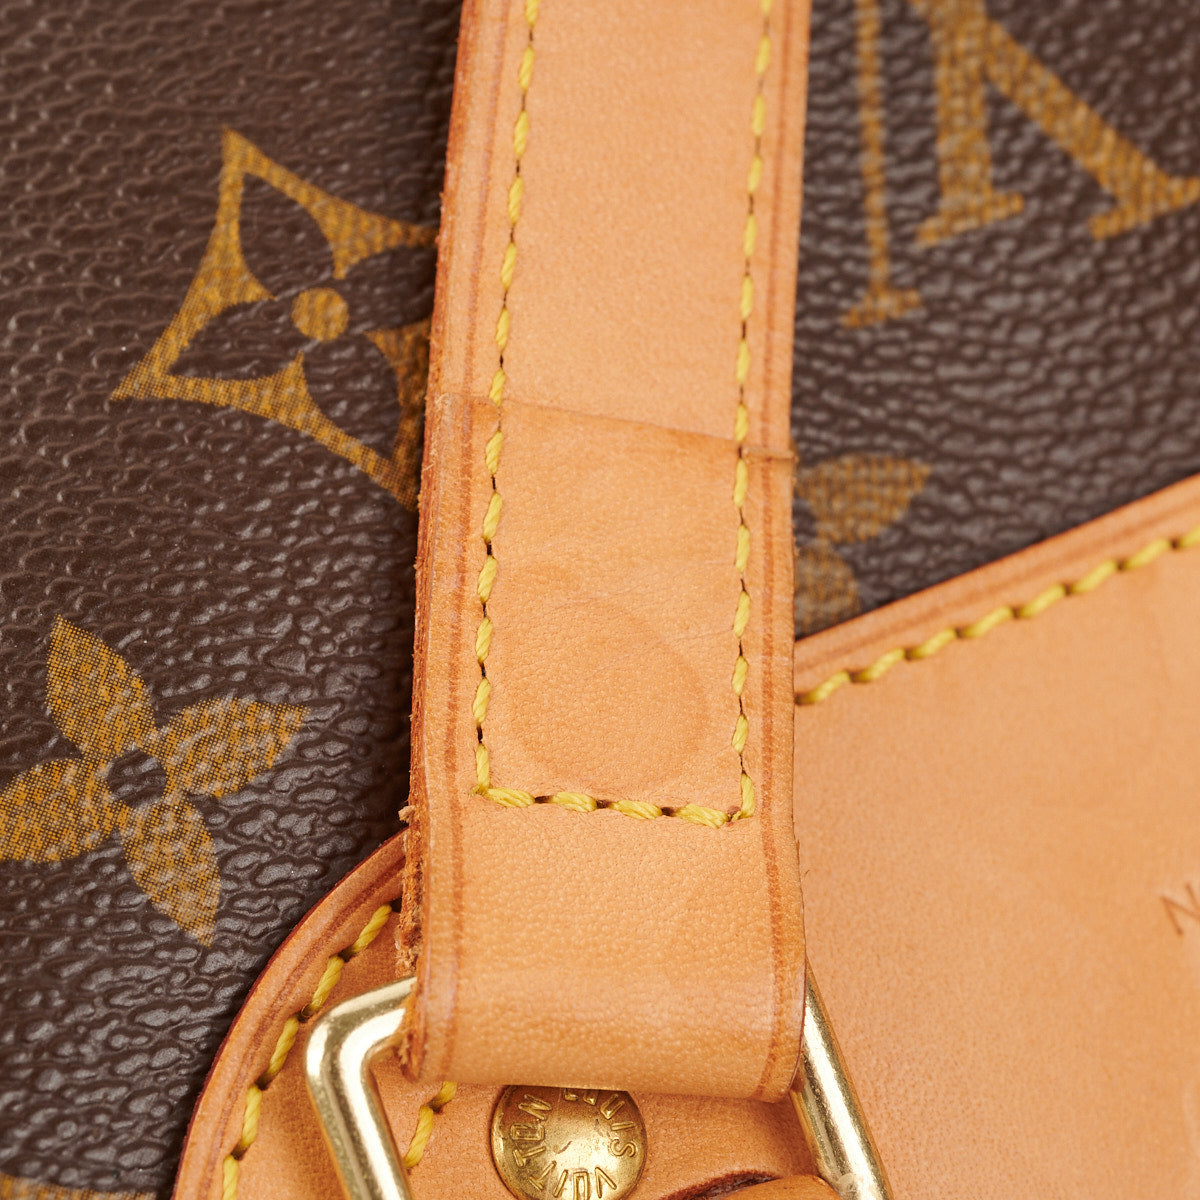 Shop for Louis Vuitton Monogram Canvas Leather Excursion Bag - Shipped from  USA